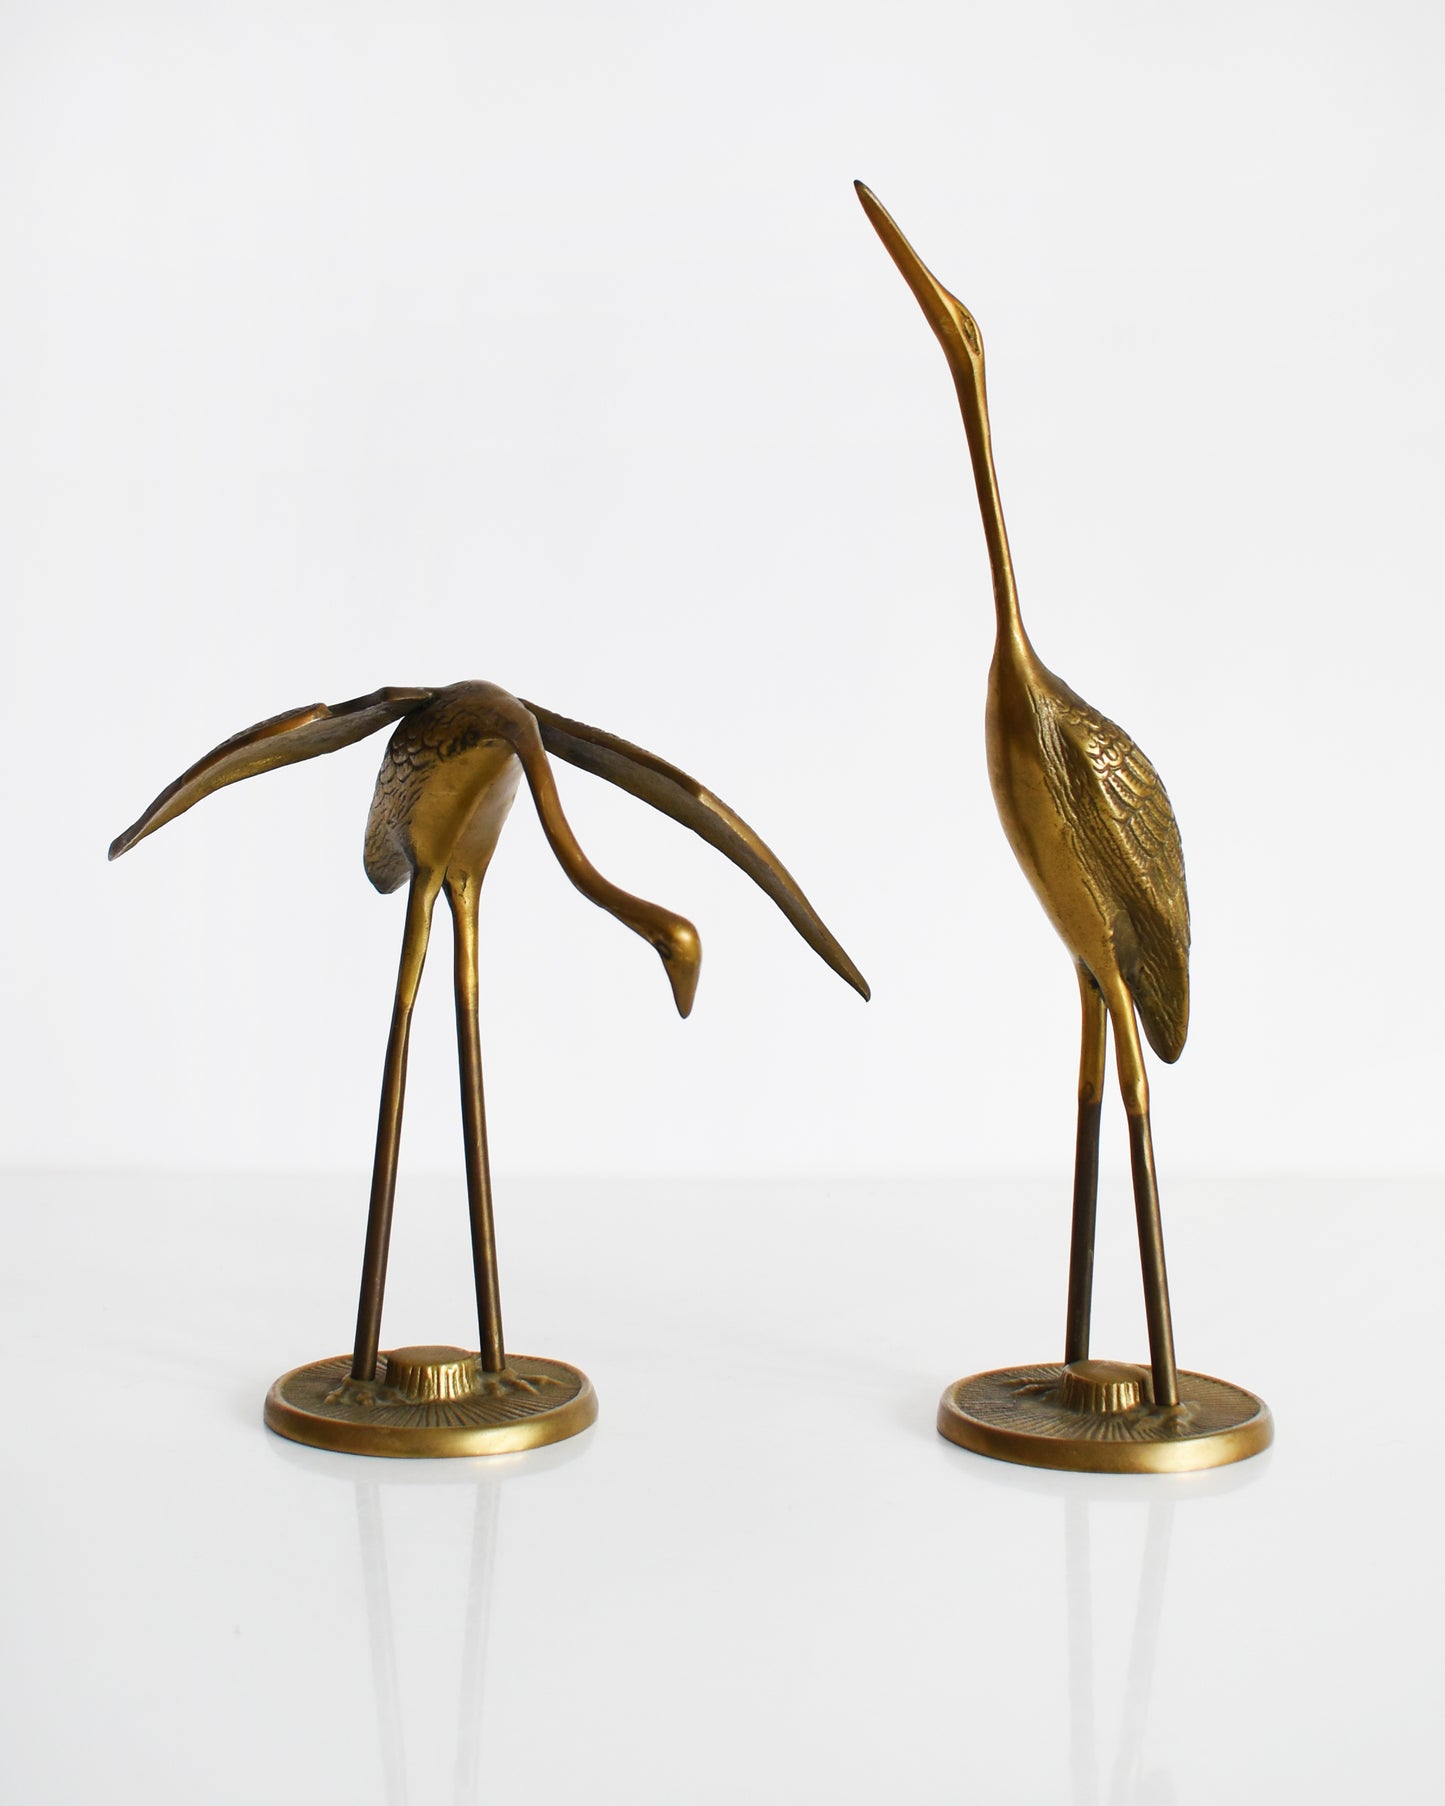 A pair of vintage brass cranes that have ornate carved detail on their wings and body.